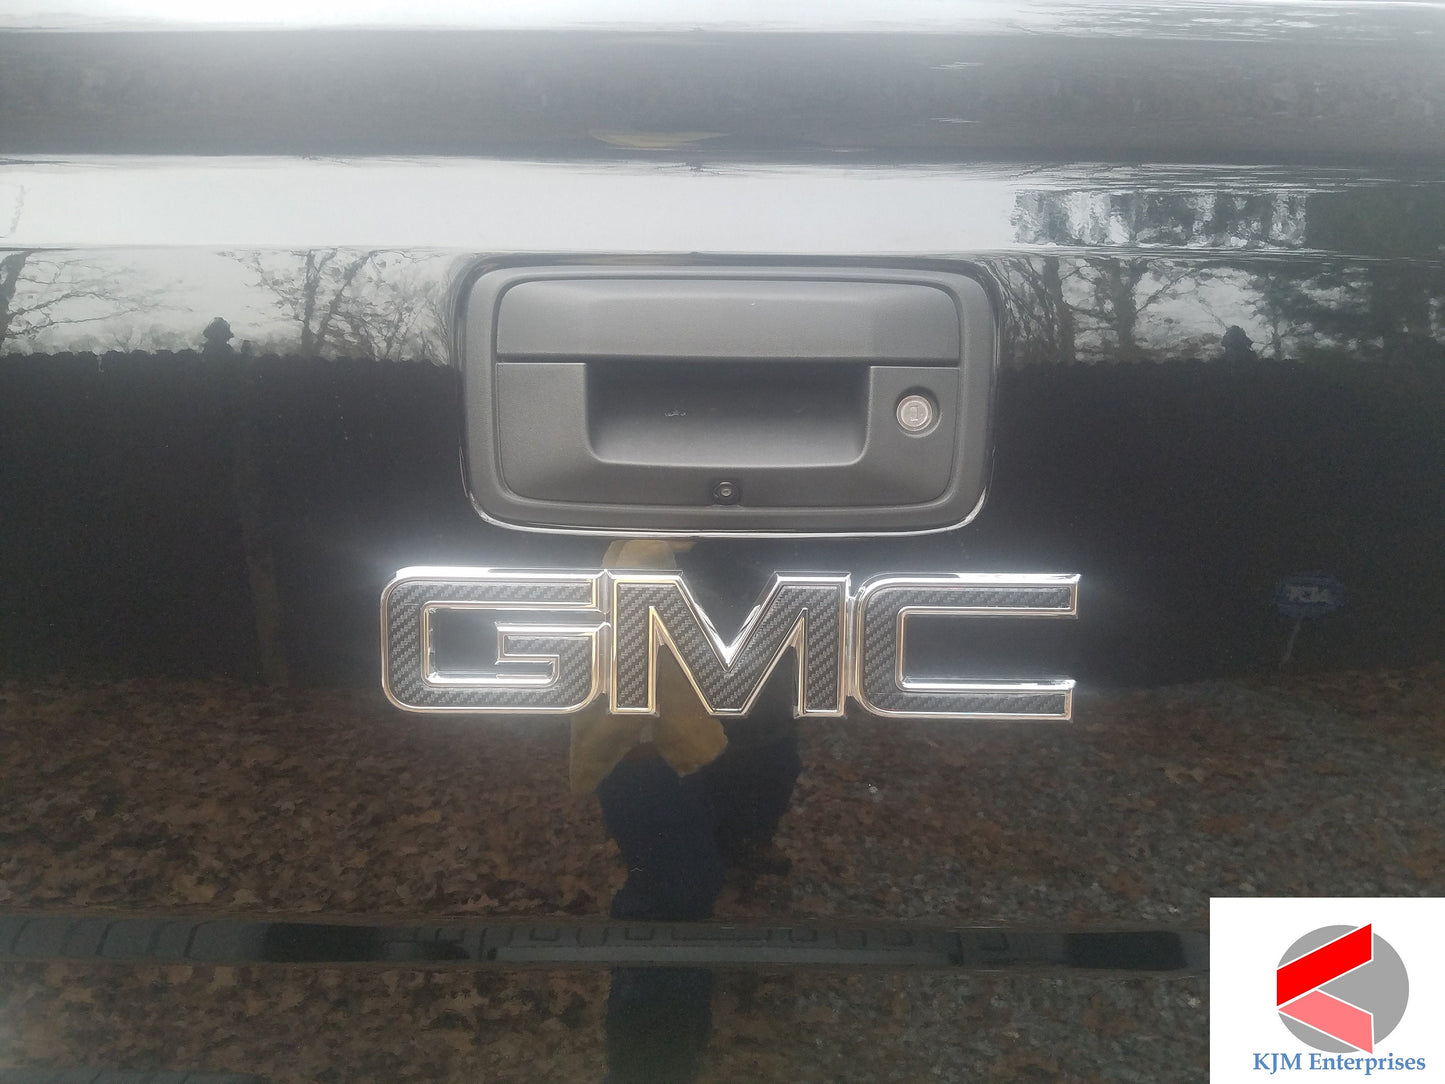 2015-2020 CANYON Precut Overlay DECALS Compatible With GMC Emblems | Front & Rear Set